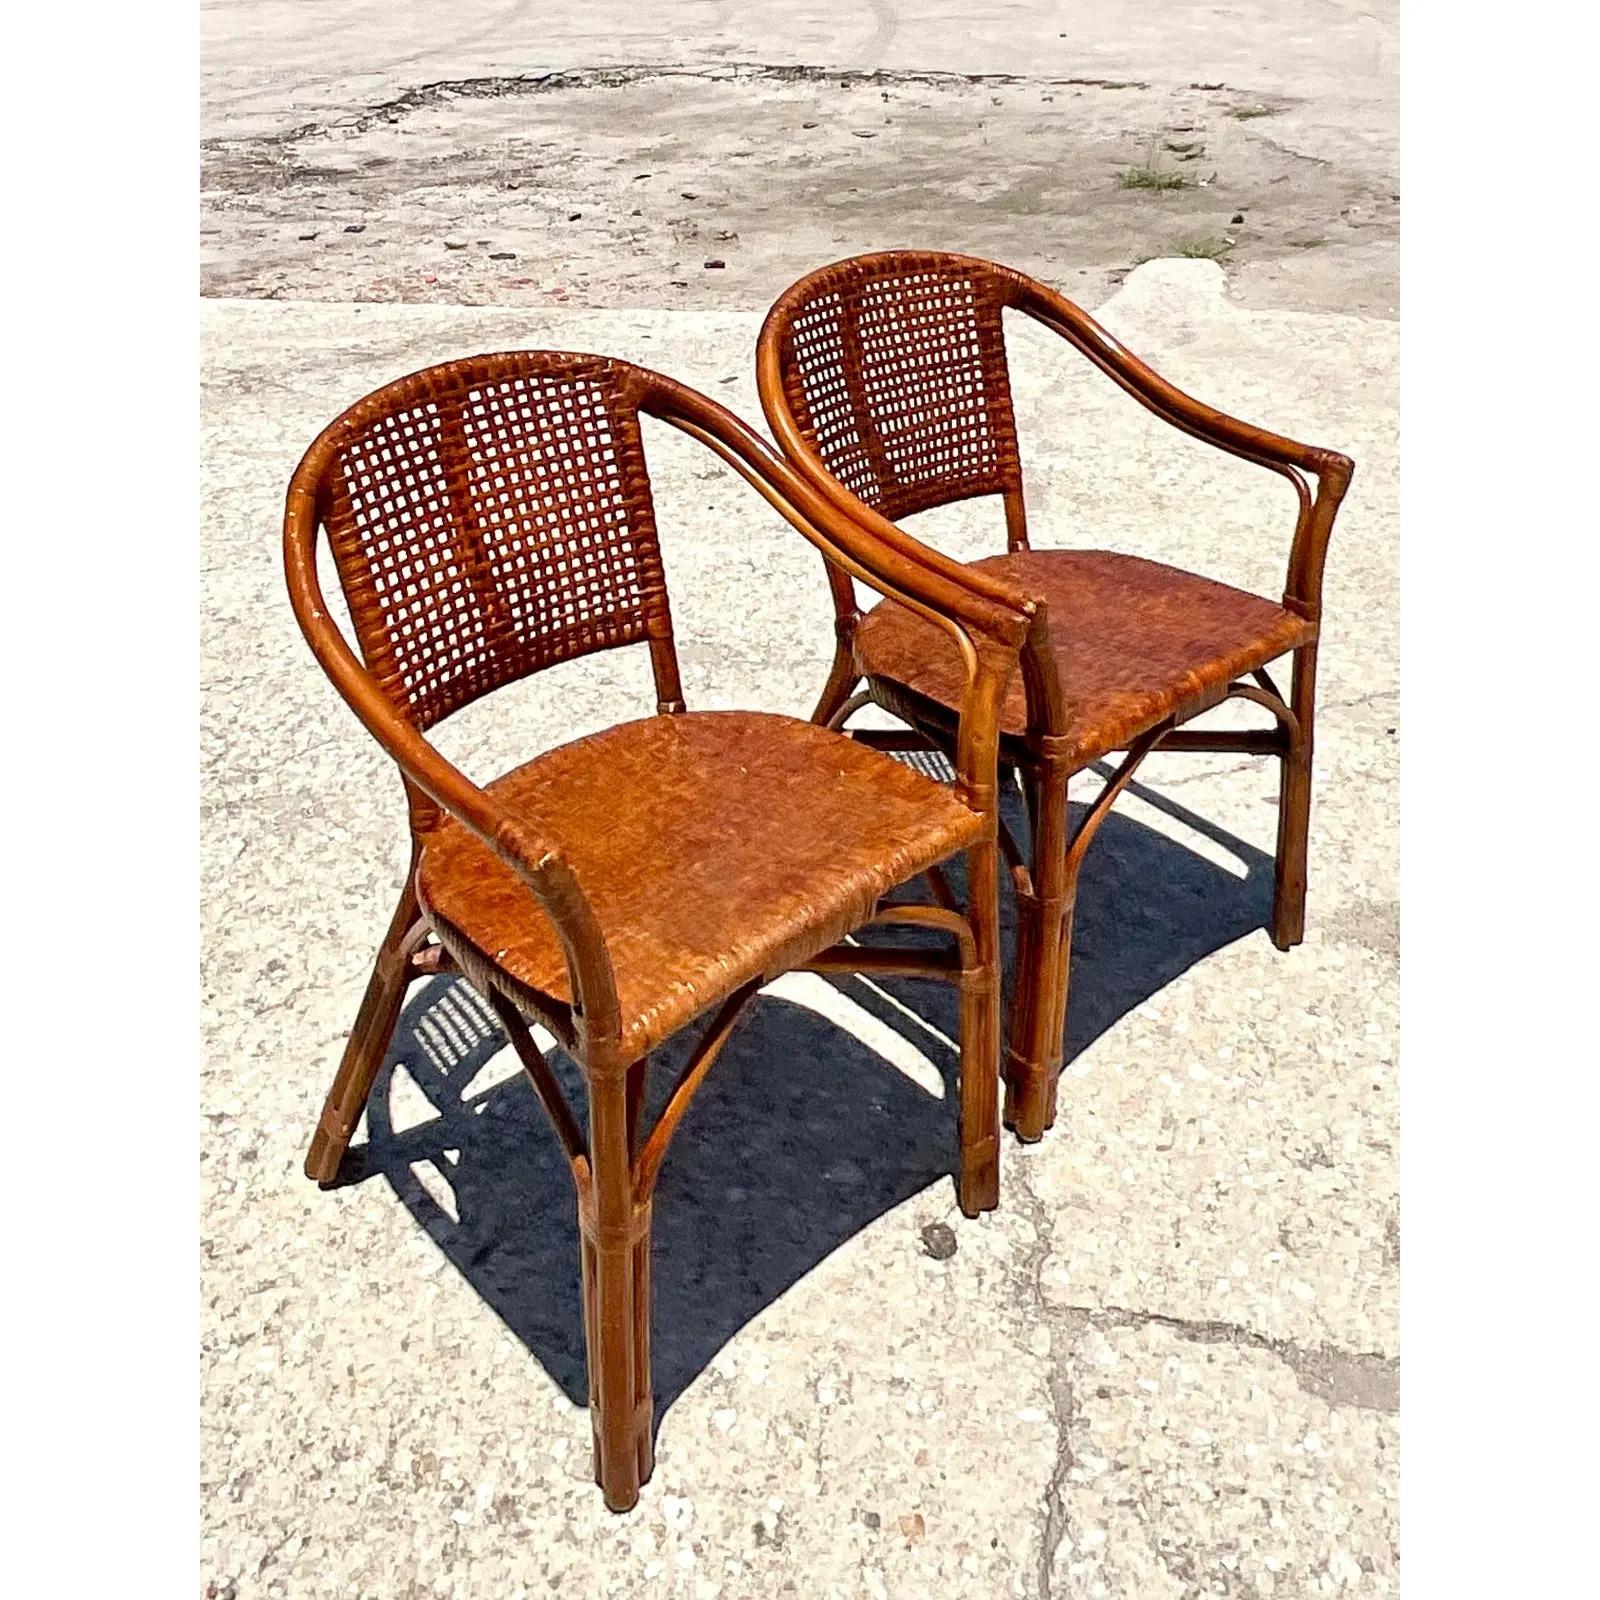 Fantastic pair of vintage Coastal side chairs. Beautiful woven rattan in a clean and open design. Perfect for addition seating or flanking your entry credenza. Super versatile. Acquired from a Palm Beach estate.